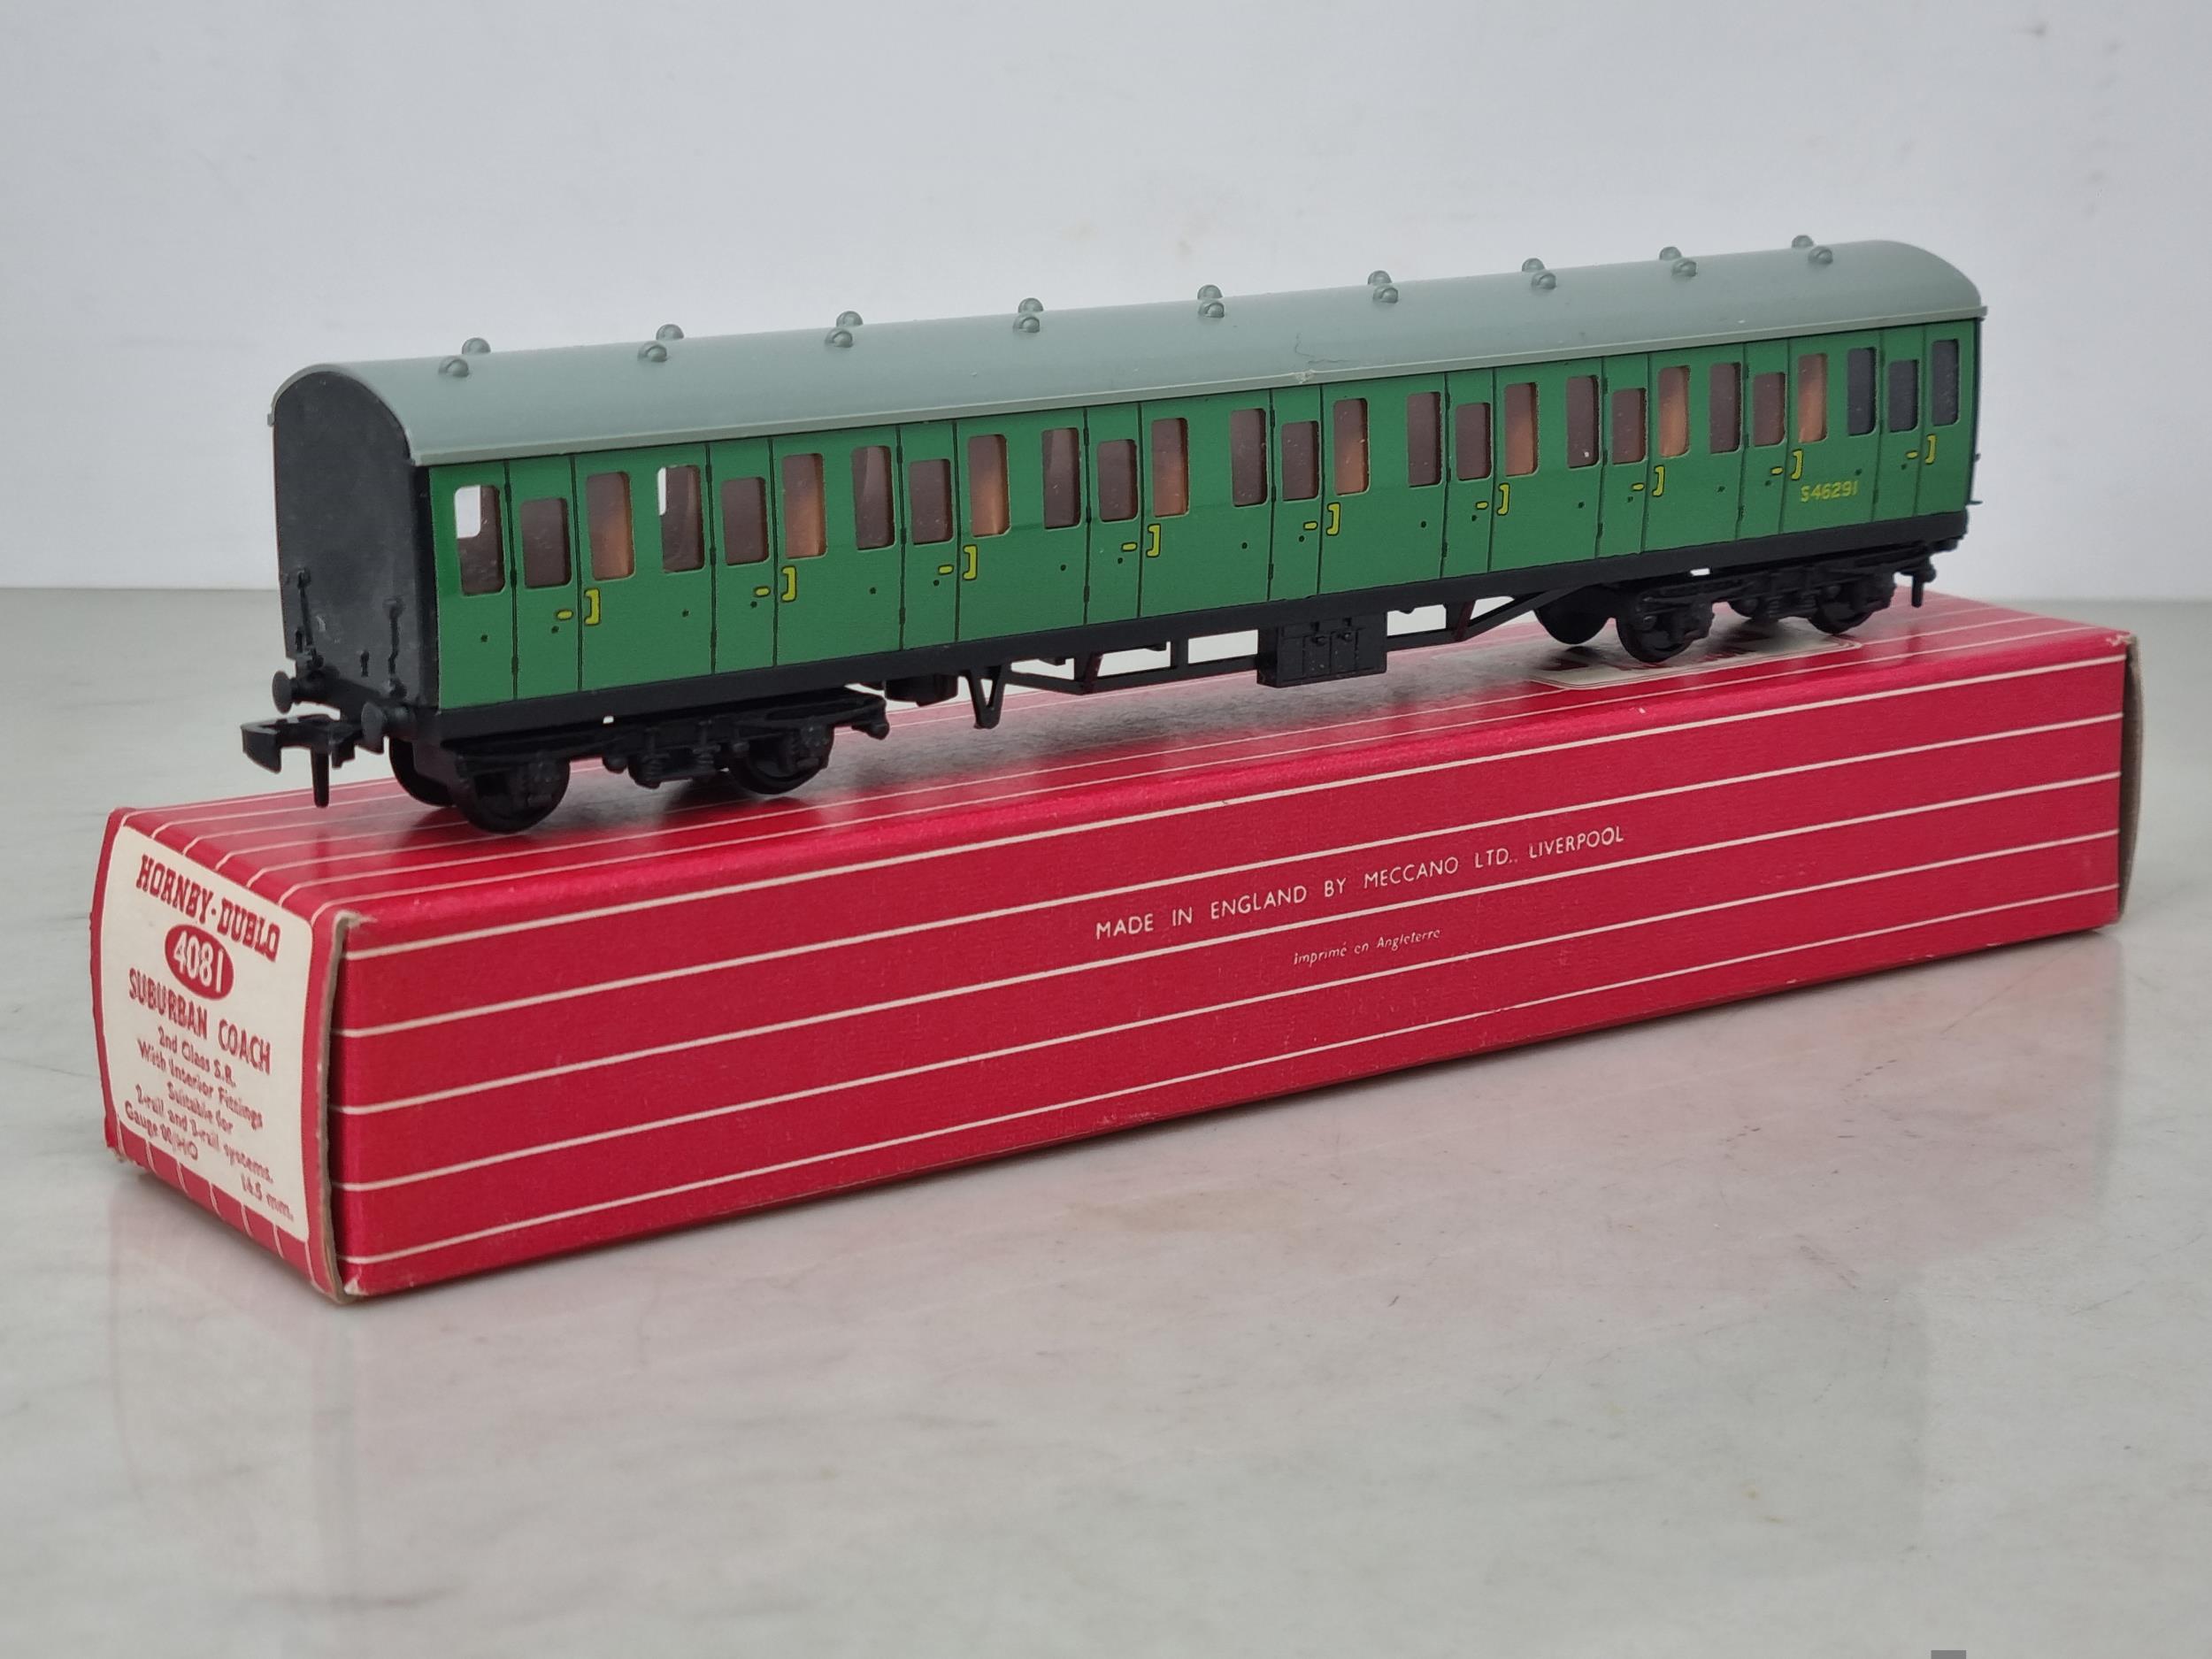 A boxed Hornby Dublo 4081 S.R. Suburban Coach in mint condition and showing no signs of use to the - Image 2 of 2